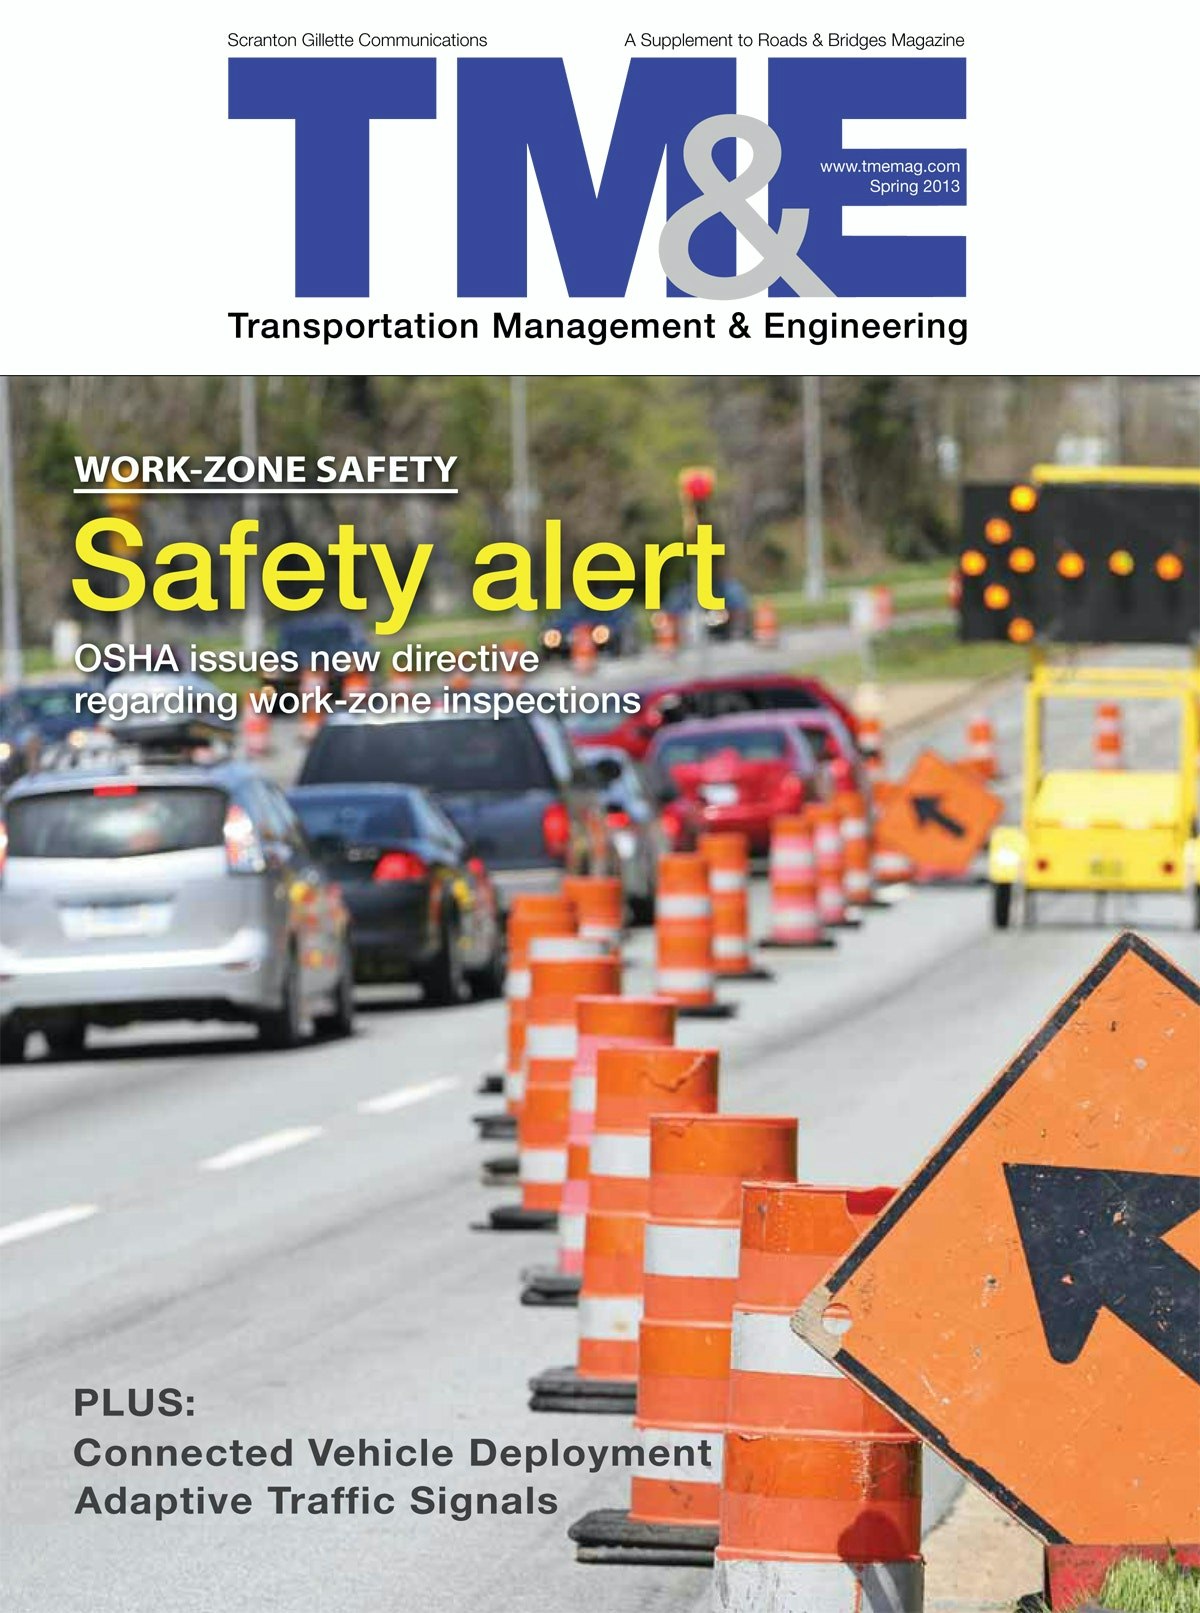 TME Spring 2013 cover image